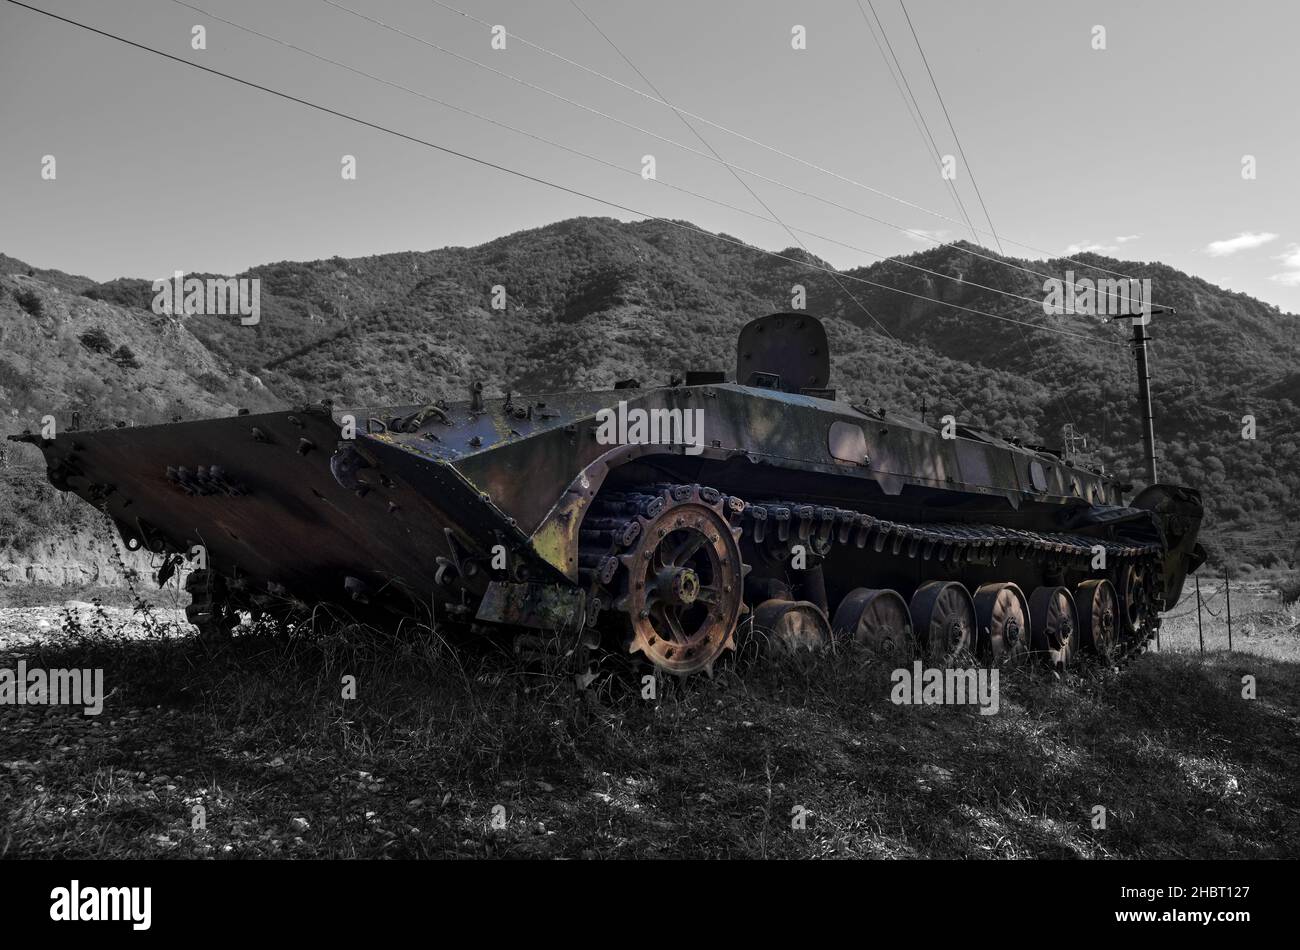 A shot down abandoned rusty soviet infantry armored vehicle (BMP). Stock Photo